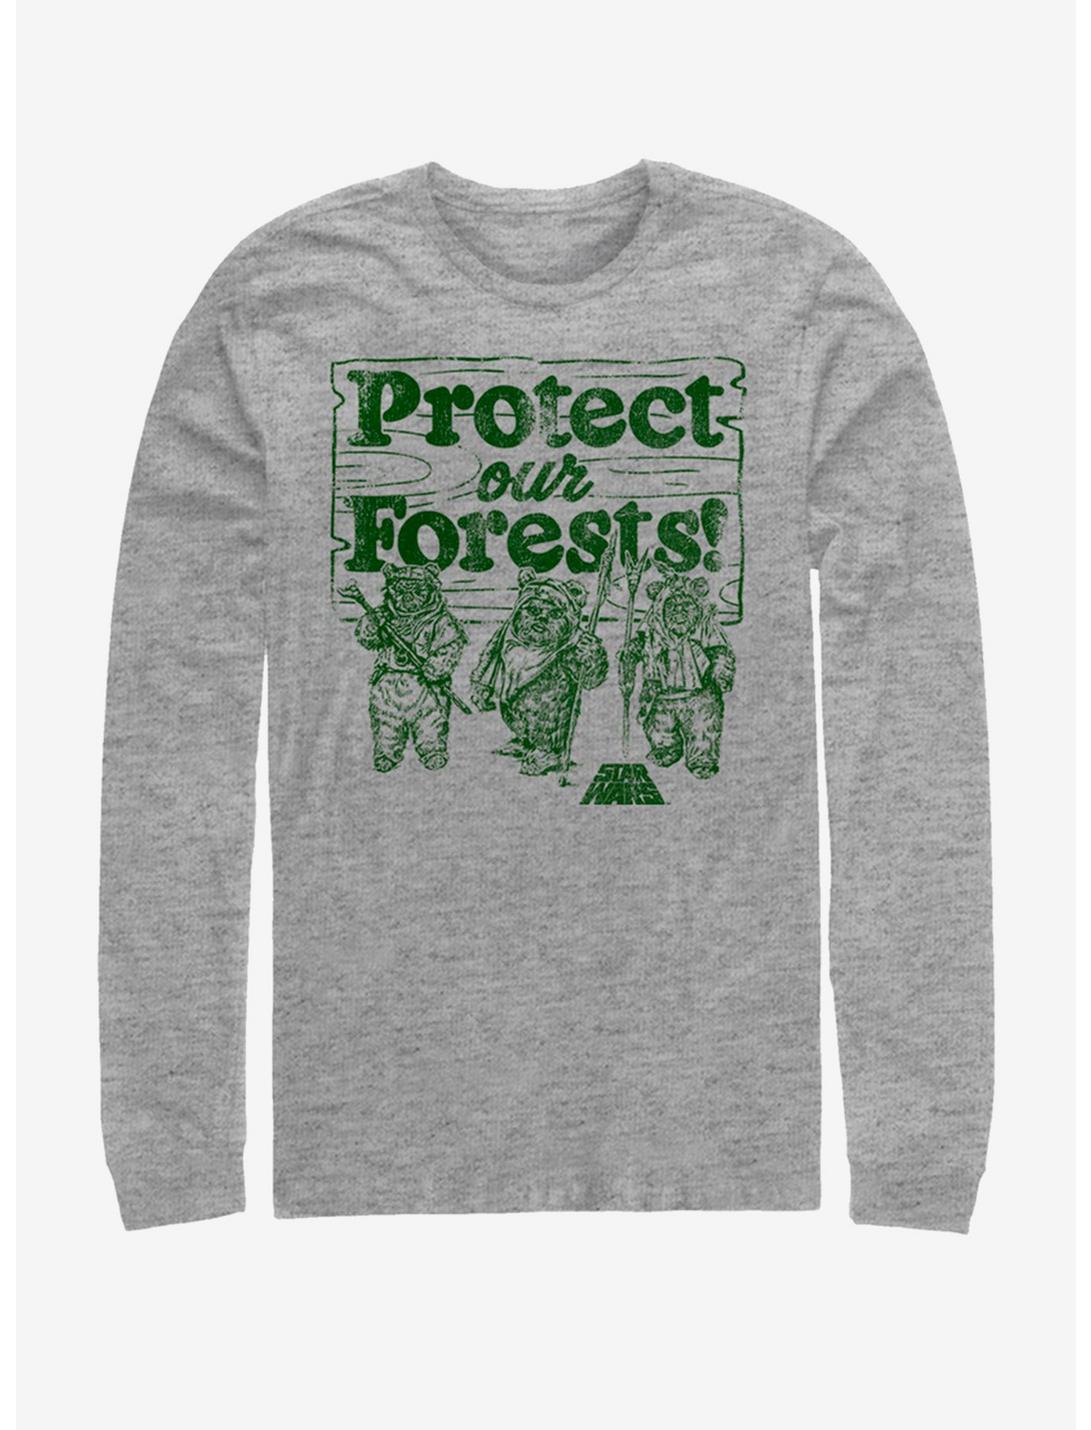 Star Wars Protect Our Forests Long-Sleeve T-Shirt, ATH HTR, hi-res